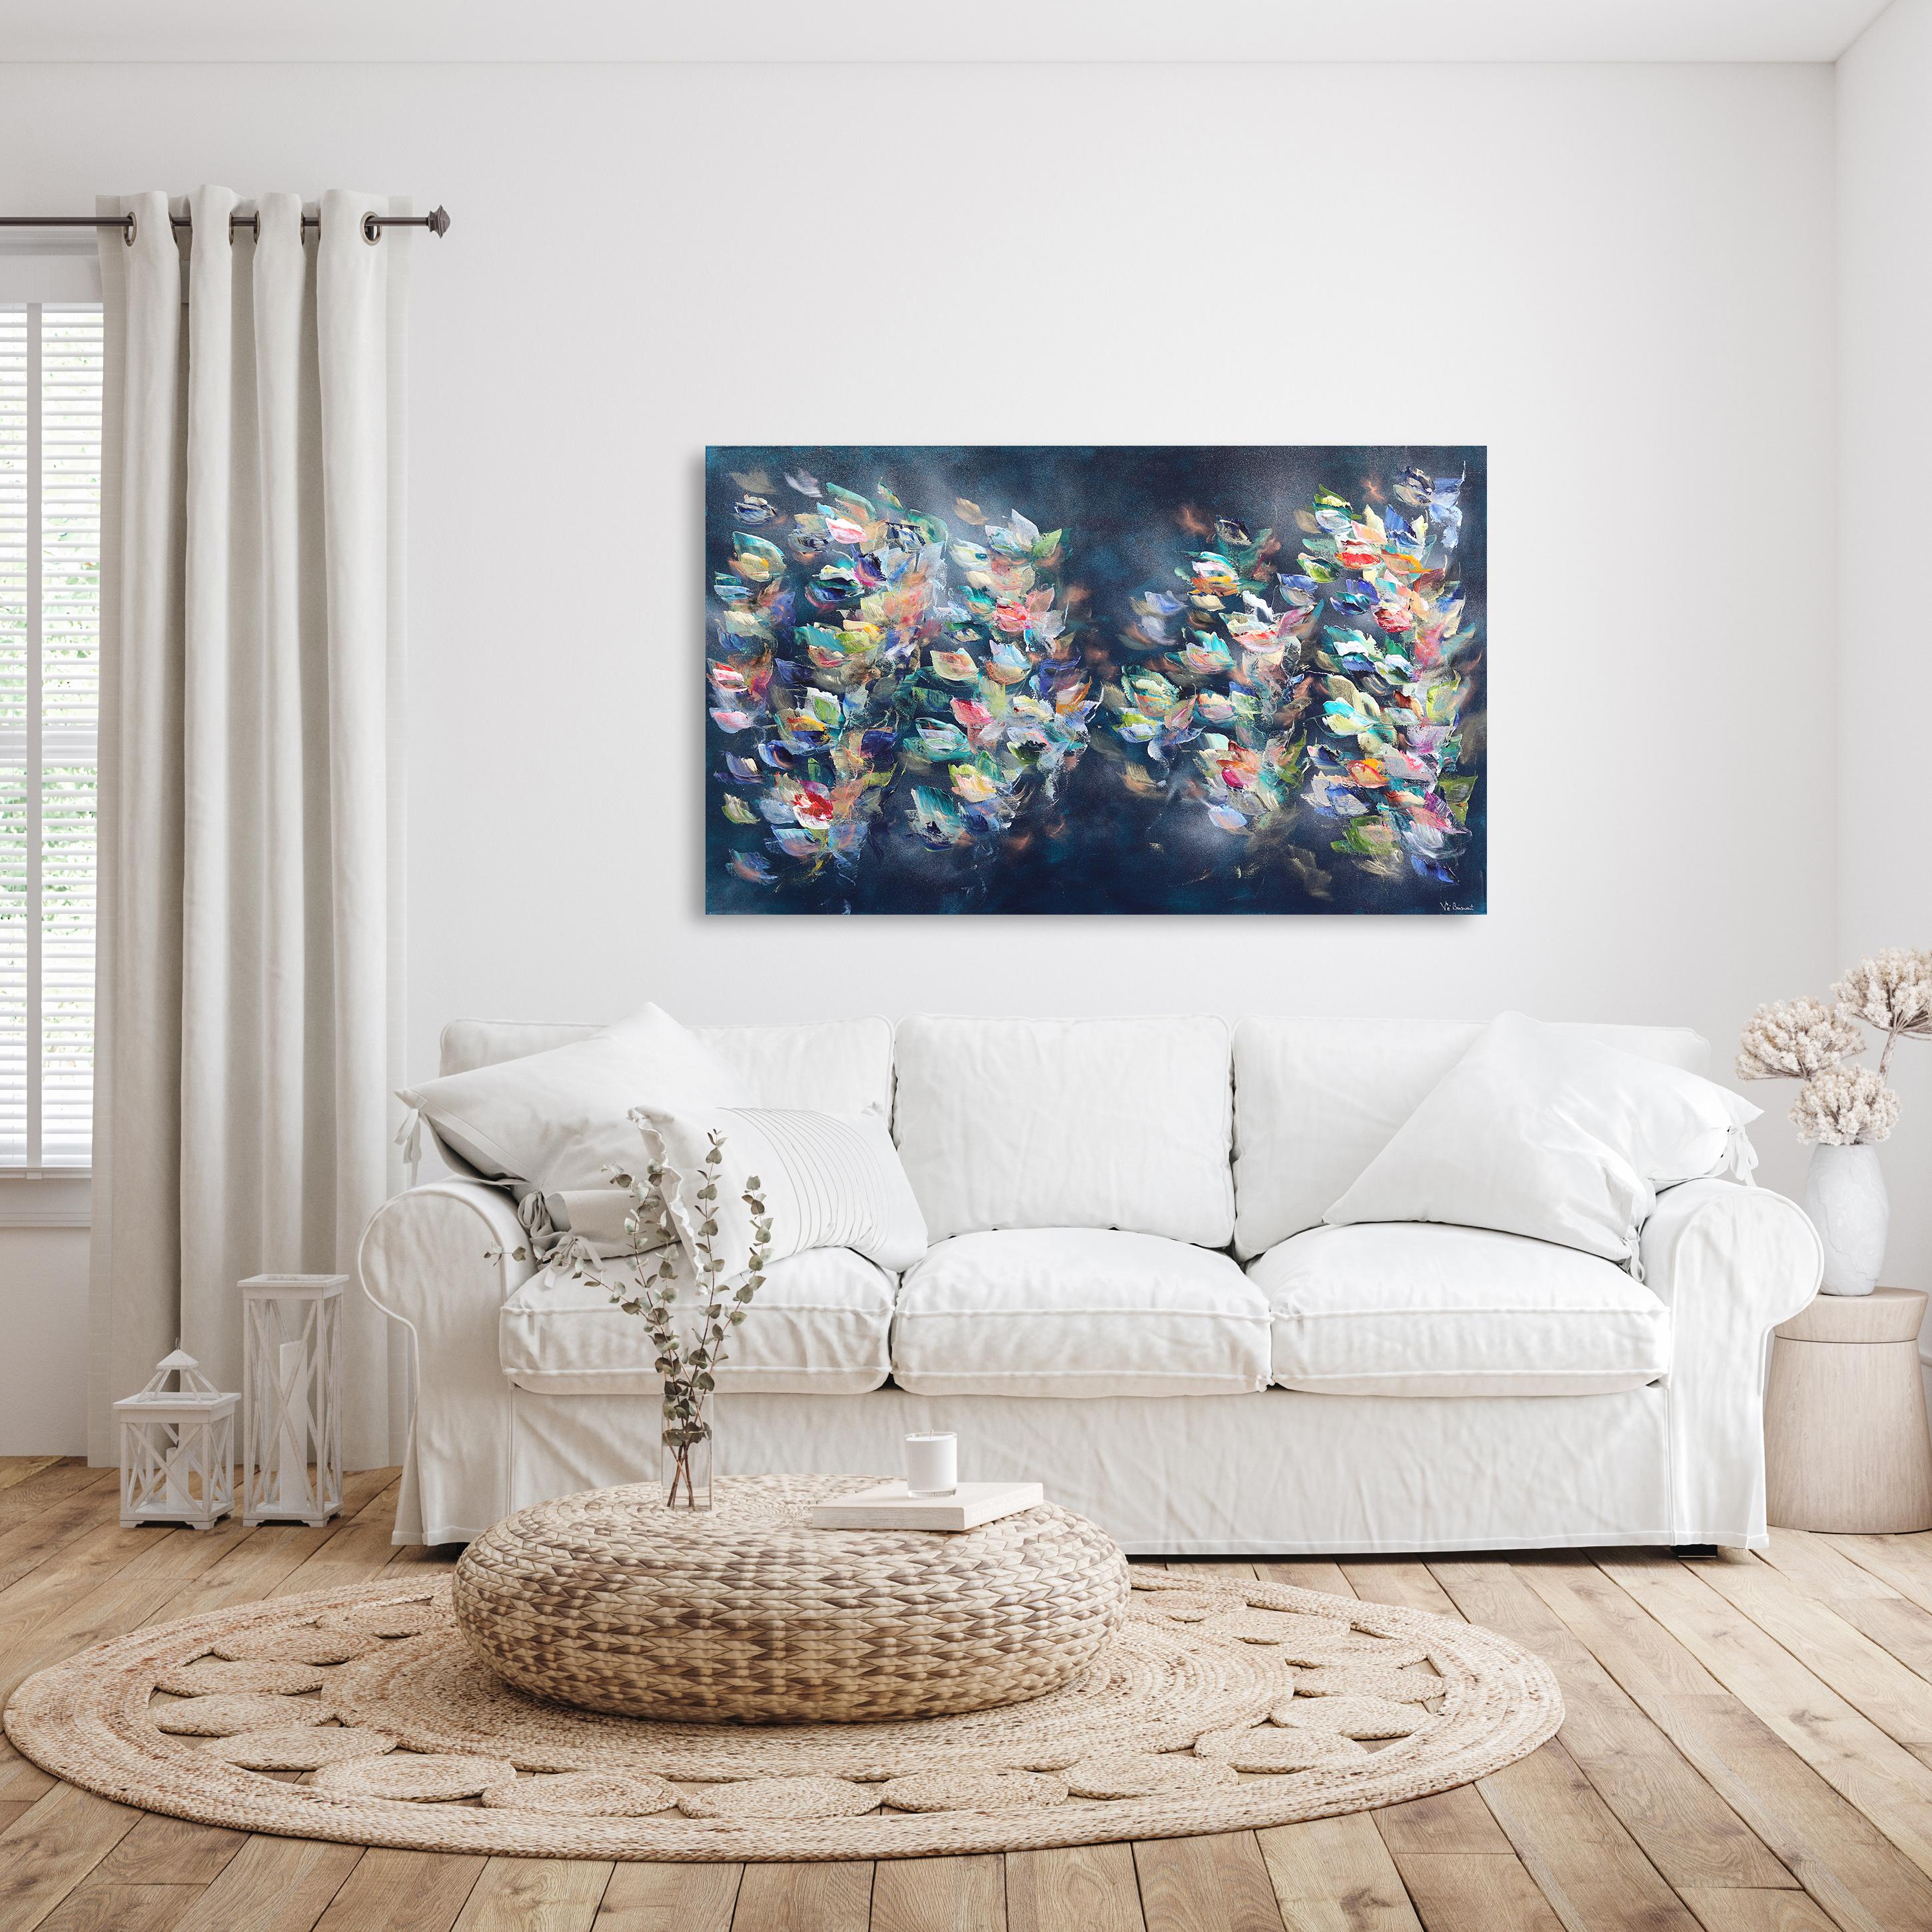 Drawing inspiration from an immersive and impressionistic interpretation of nature, Canadian artist Vé Boisvert paints textural original artworks that capture the fleeting effects of light and color expressed in the ephemeral qualities of her